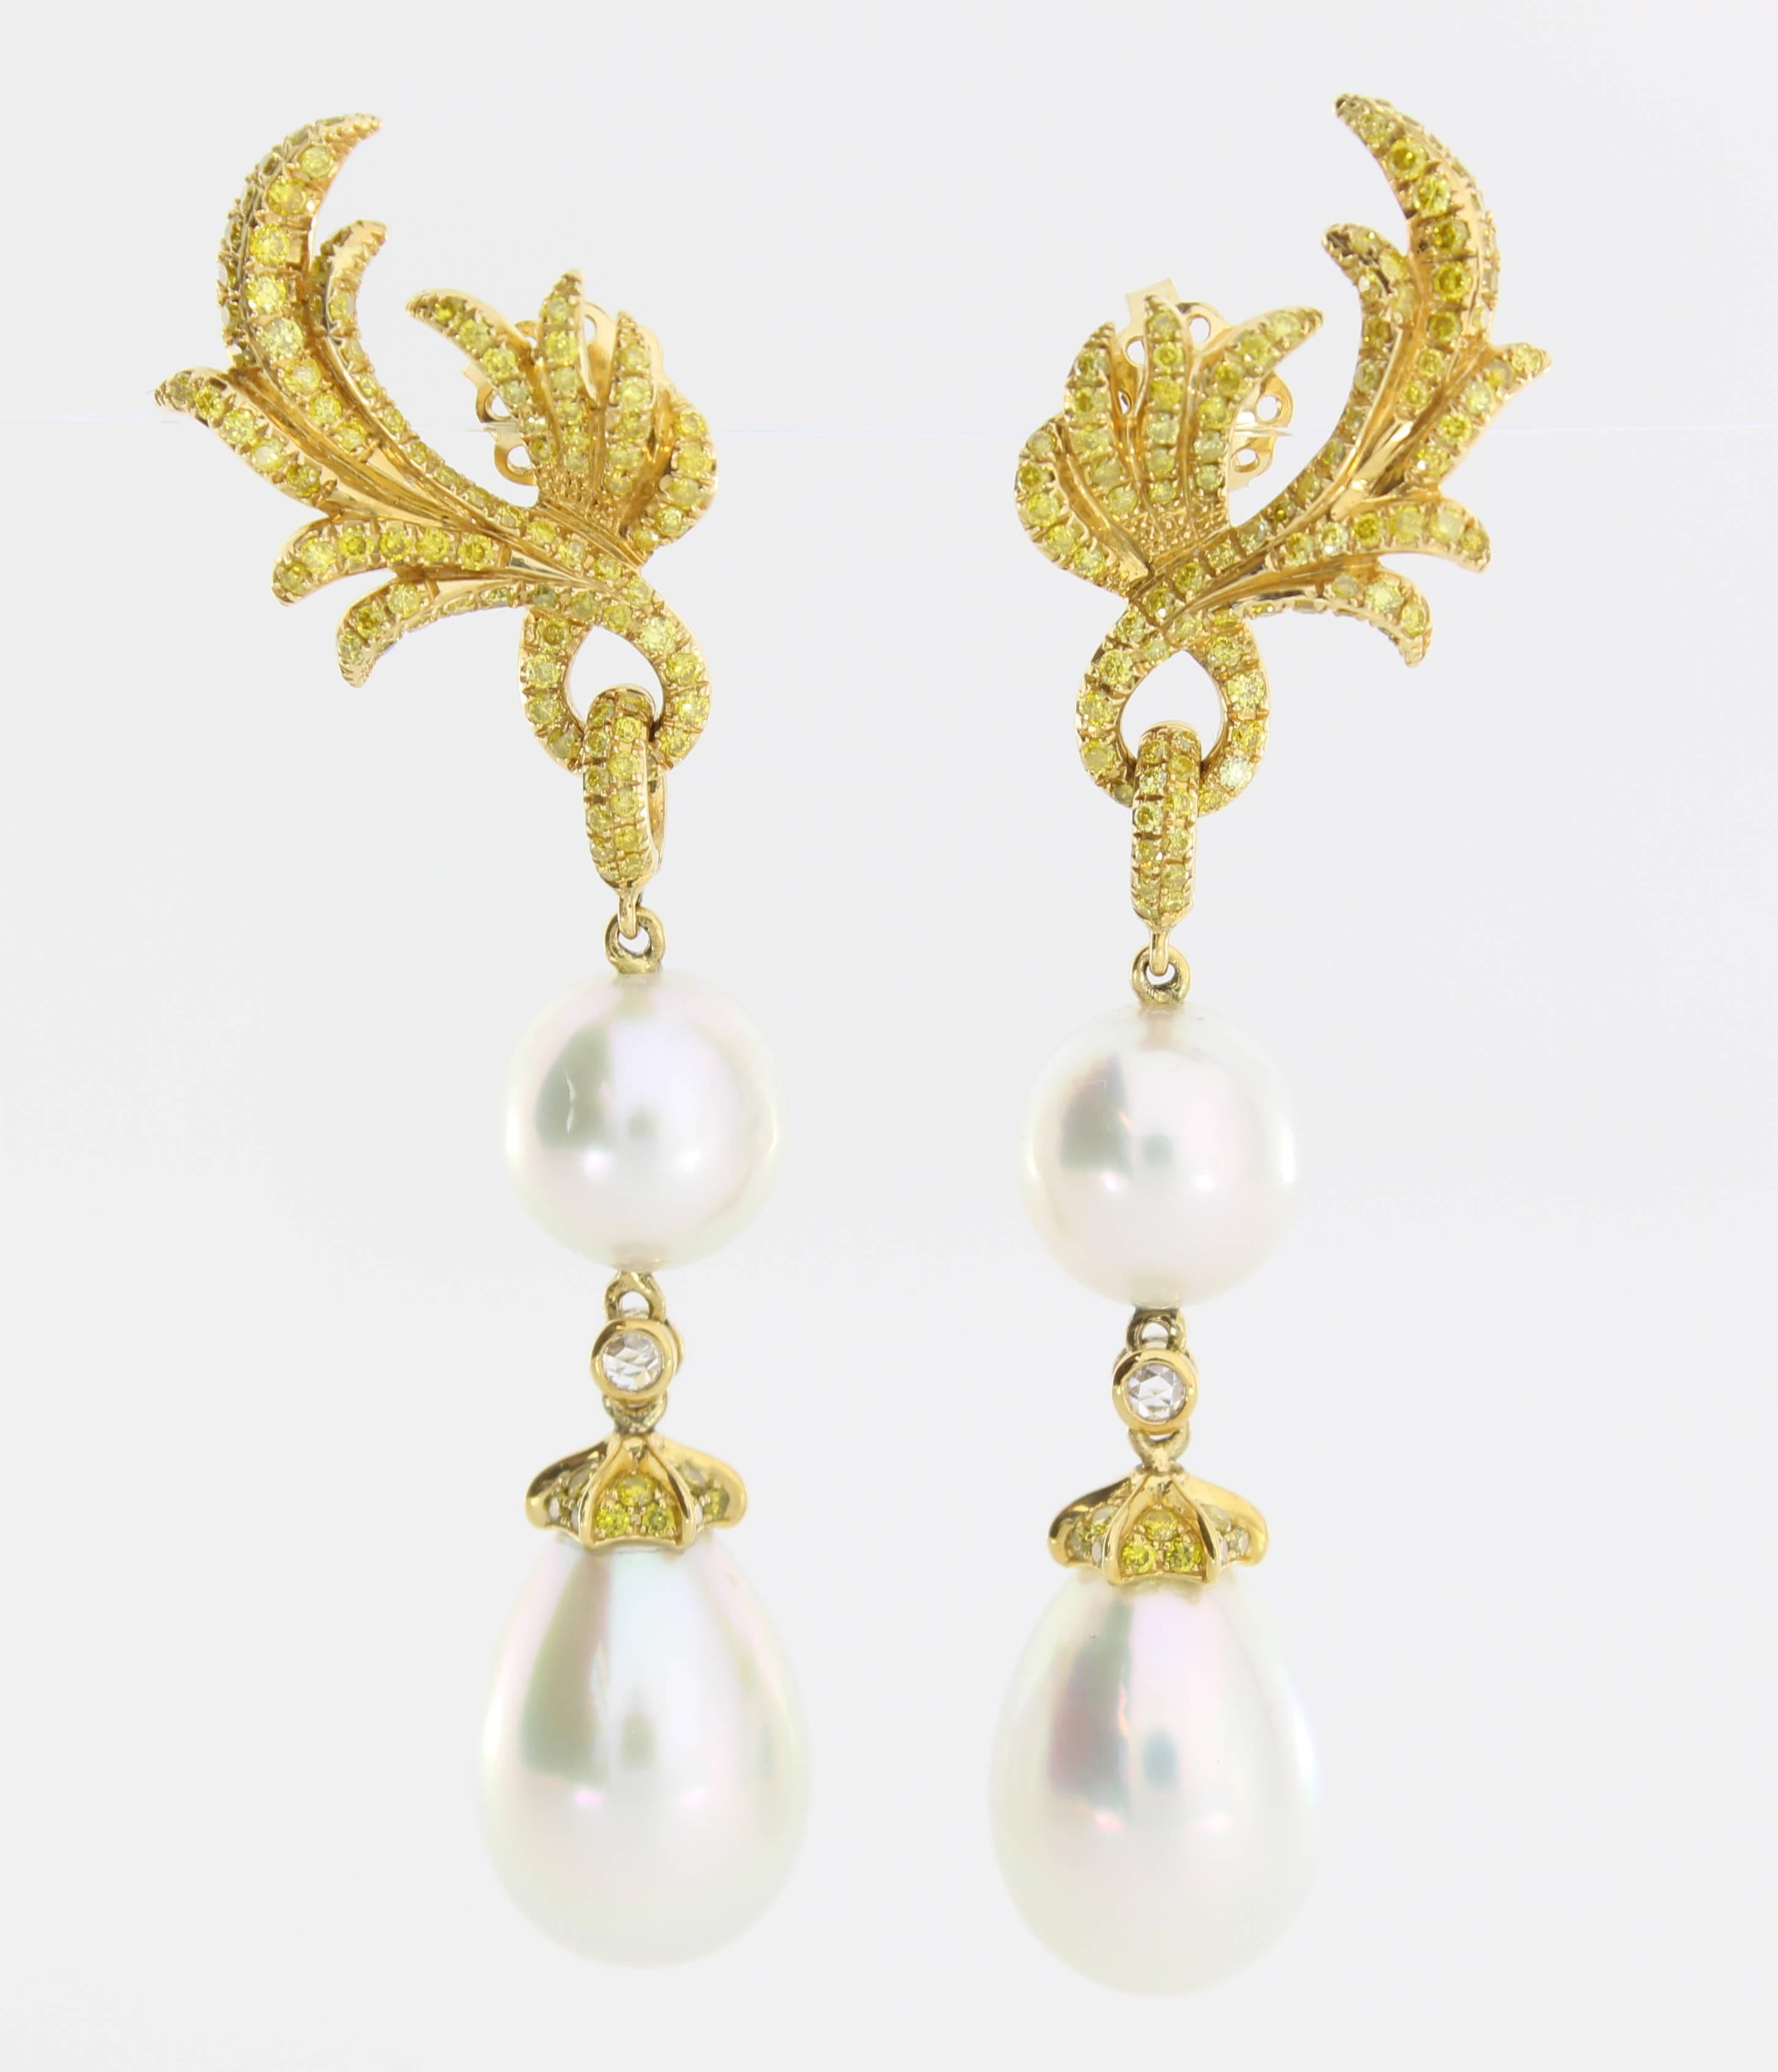 The Versailles Earrings are from the AUTORE Metropolitan Collection and are inspired by the Palace de Versailles in France. The piece is crafted in 18k Yellow Gold with Yellow Diamonds (1.25ct Brilliant Cut), White Diamonds (H SI 0.047ct Rose Cut),